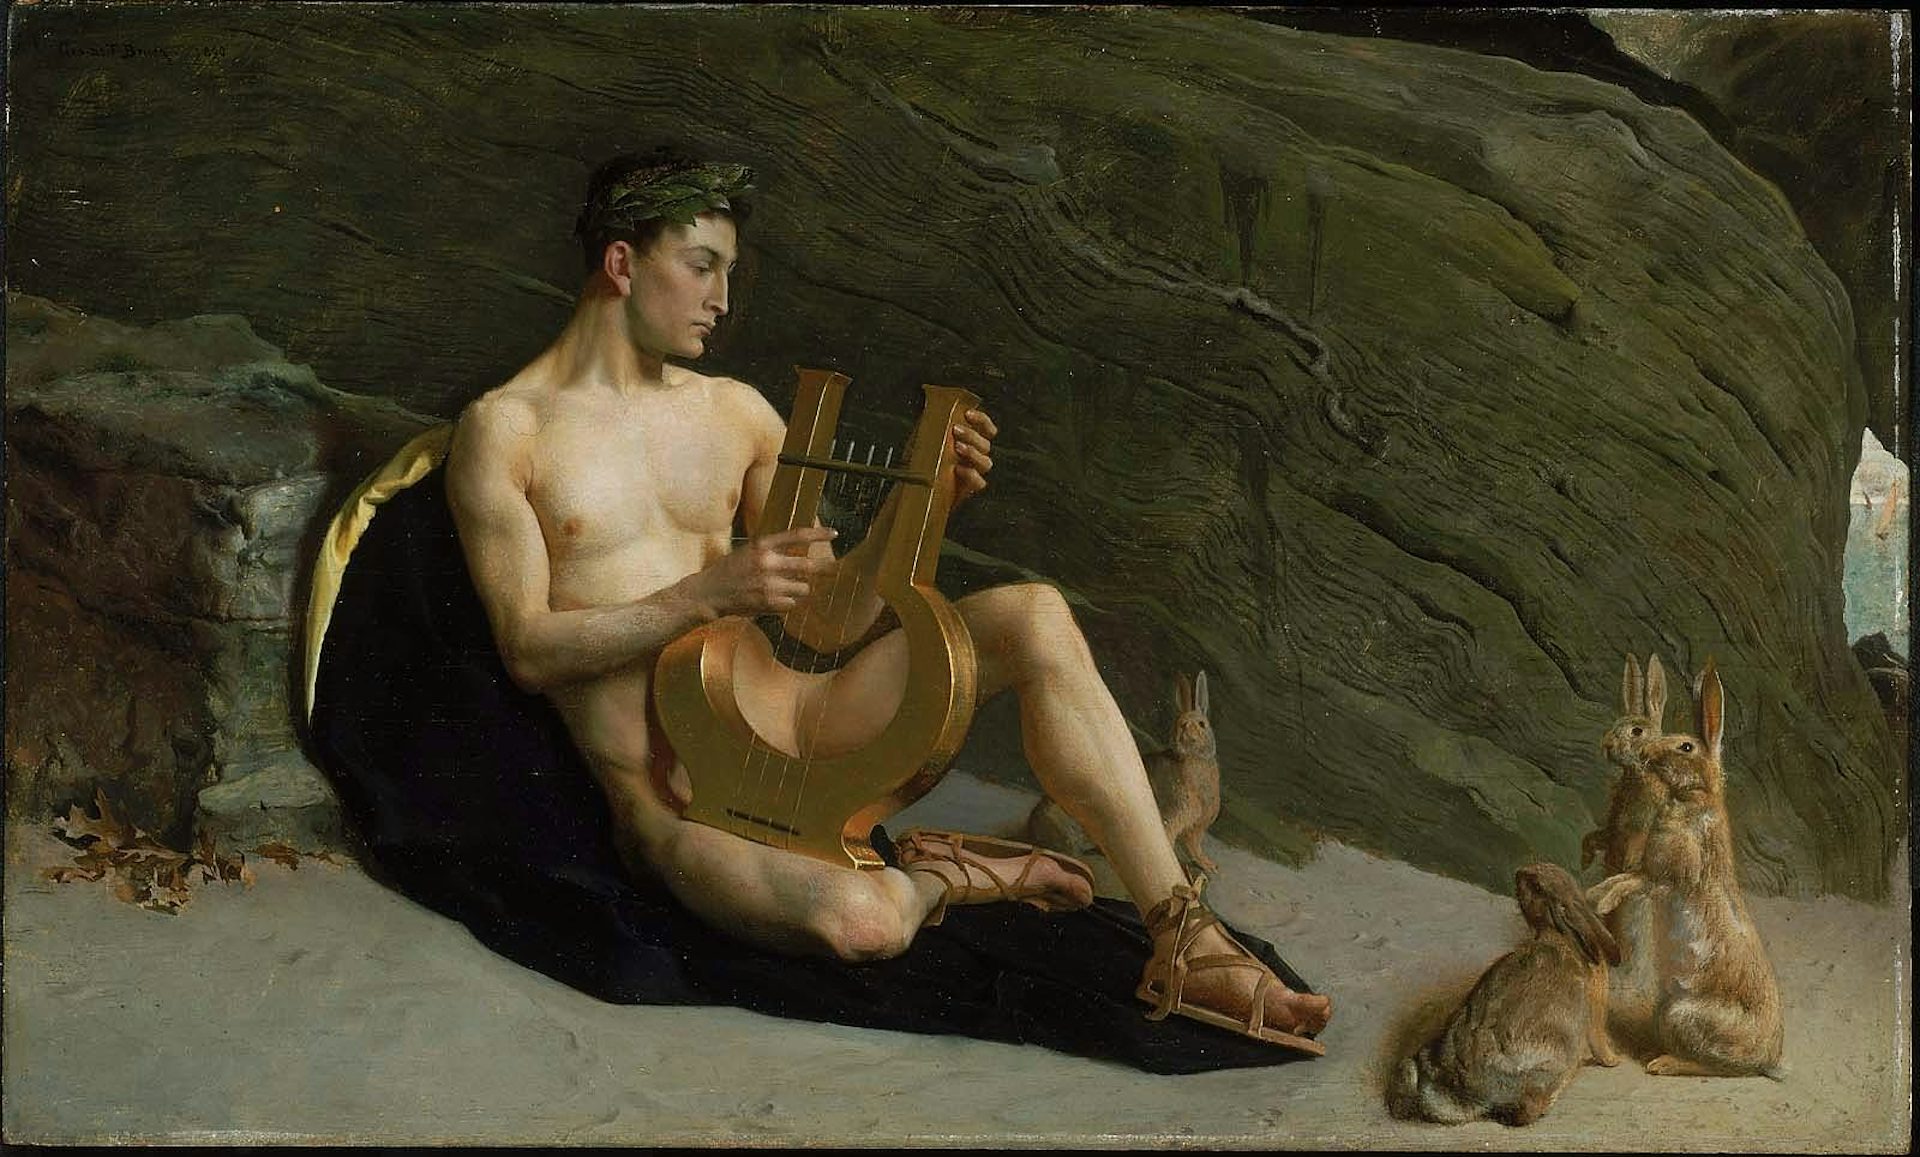 Orpheus by George de Forest Brush (1890)